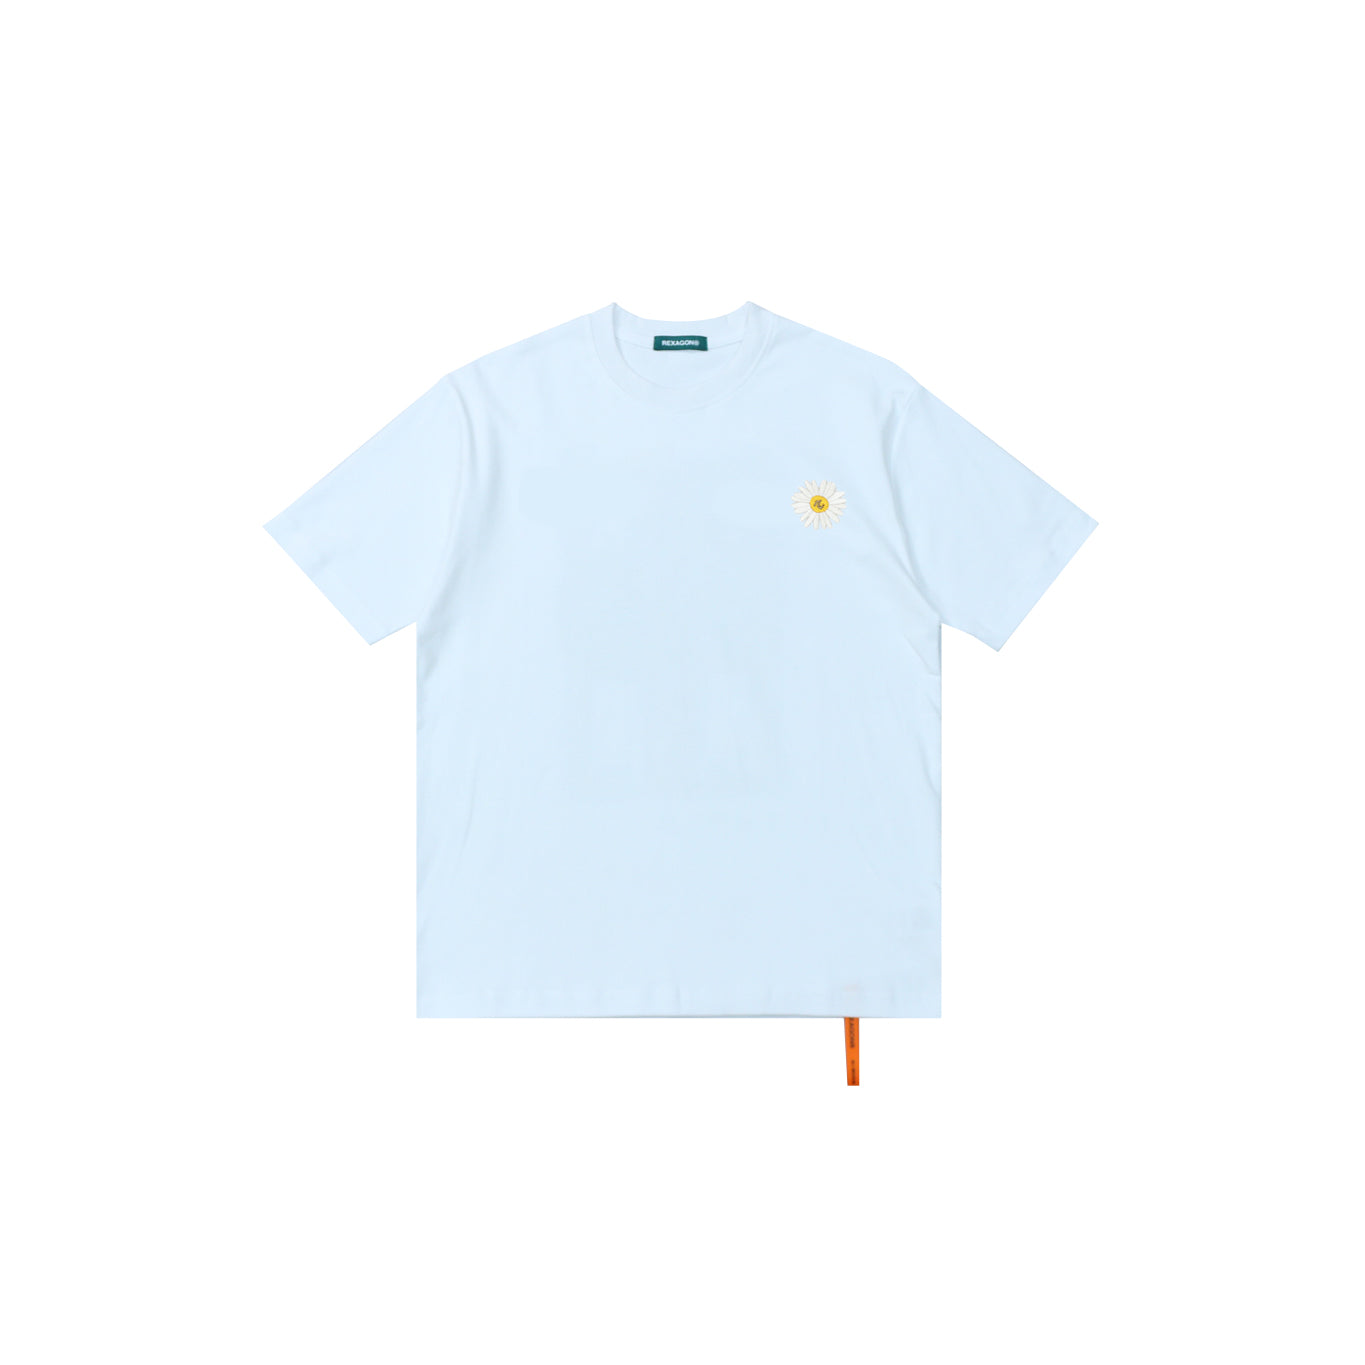 Happy To Bee With You Tee - White